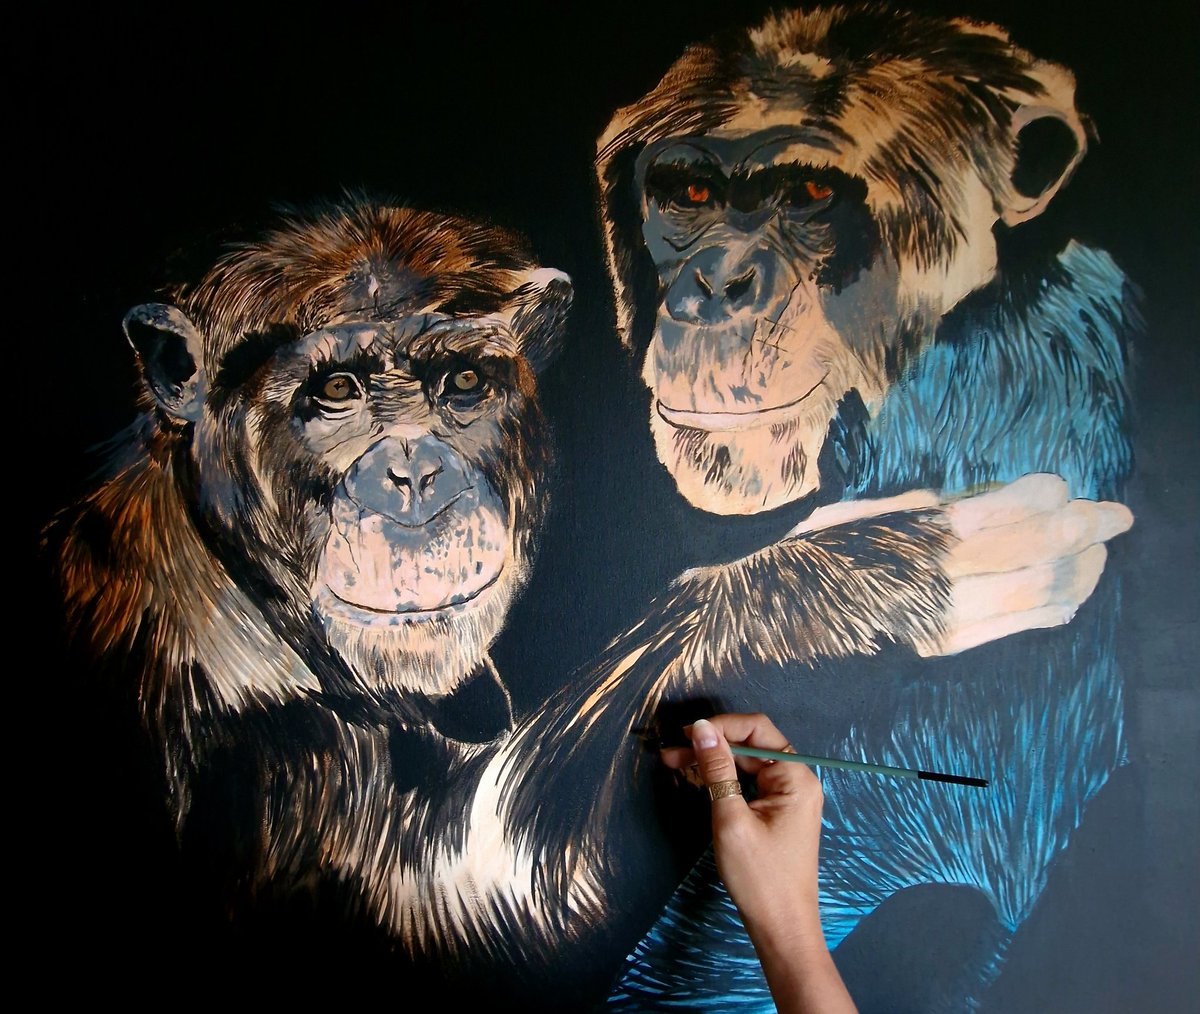 Work in progress ,early stage ,acrylics on canvas 100x70cm... 
#acryliconcanvas #acrylicpainting #workinprogress #paintinginprogress #animalartist #animalartwork #canvasart #artoncanvas